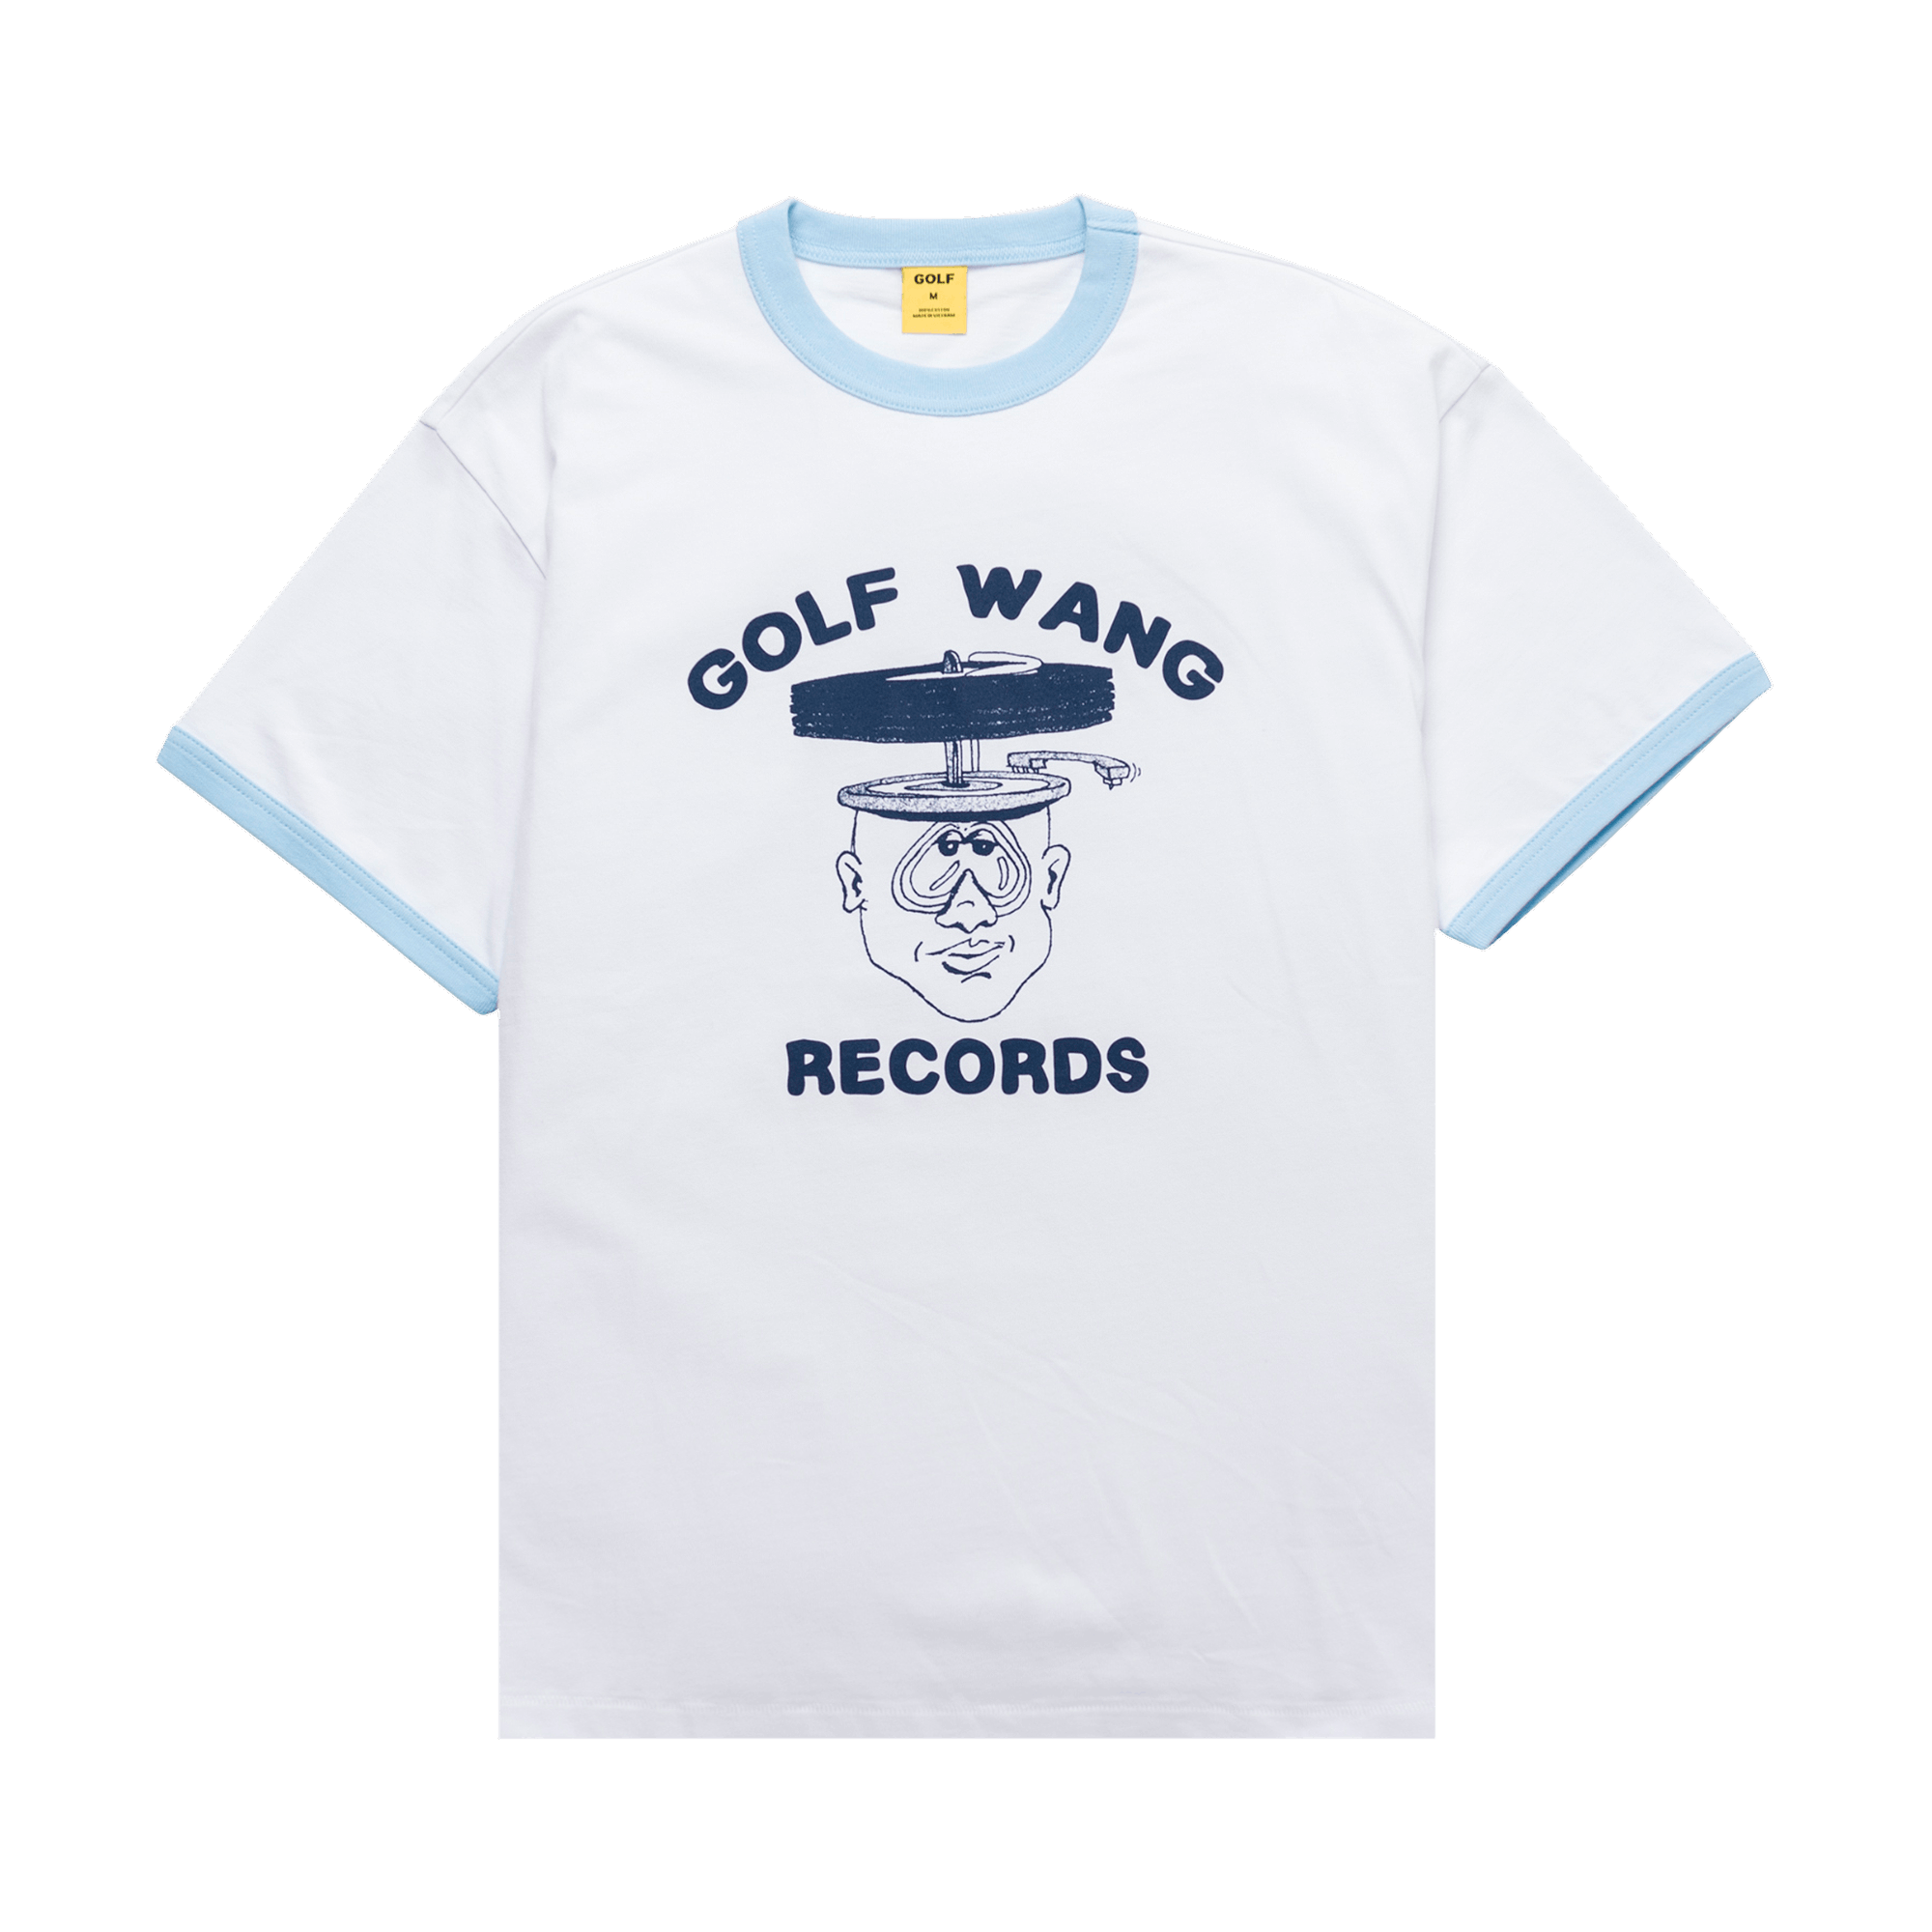 Pre-owned Golf Wang Records Ringer Tee 'white/blue'